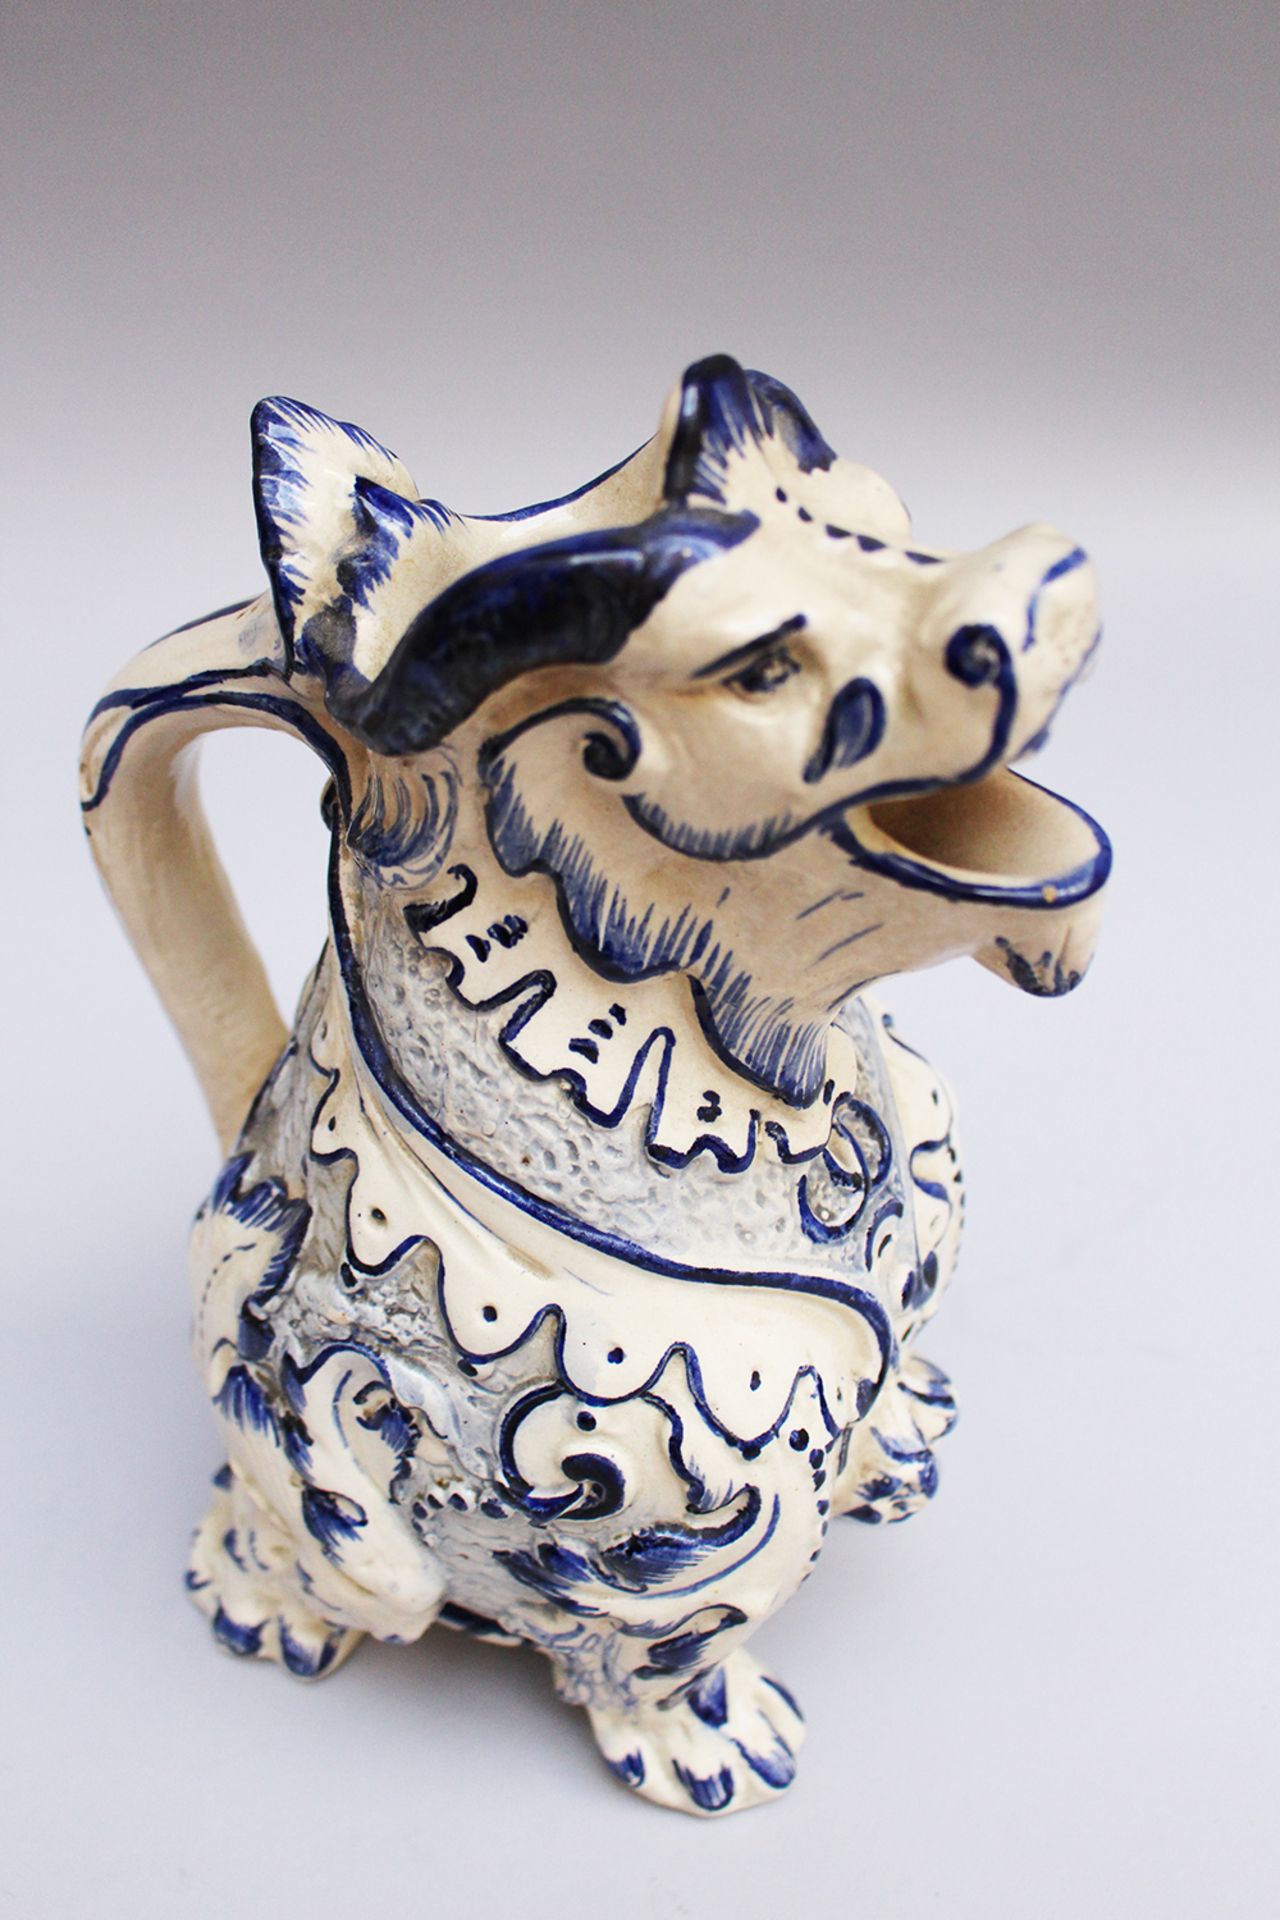 Ceramic jug in Emille Galle (1846-1904)- manner, lion with open mouth and handgrip, painted and glaz - Bild 3 aus 3